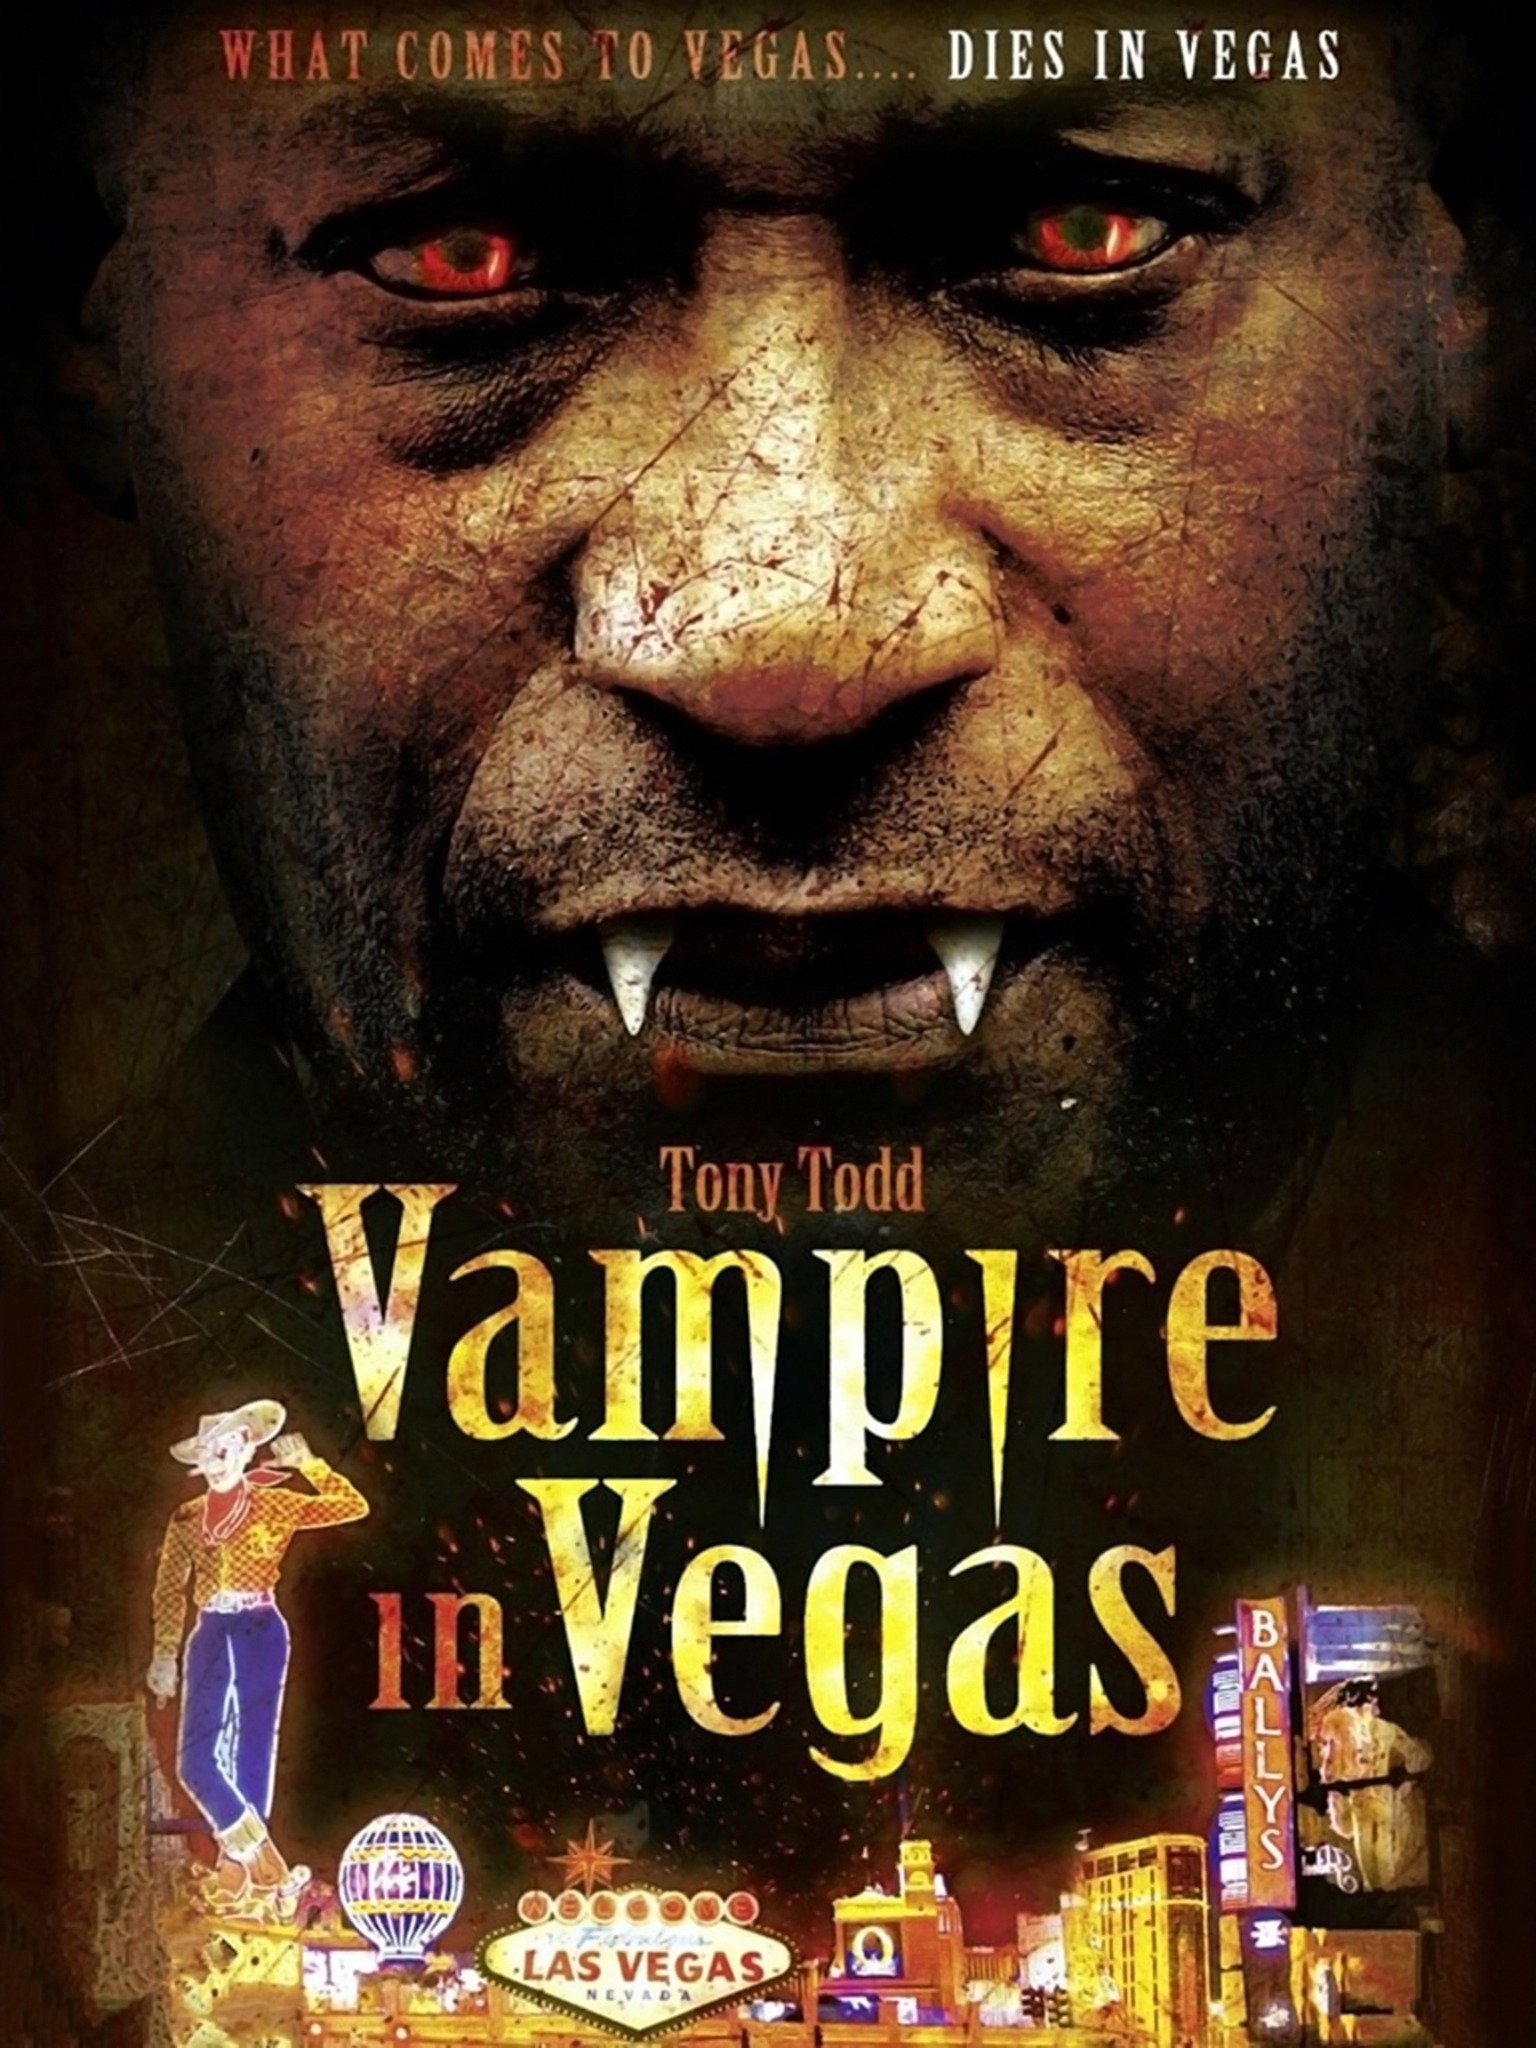 Tony Todd in Upcoming Werewolf Game - Movie & TV Reviews